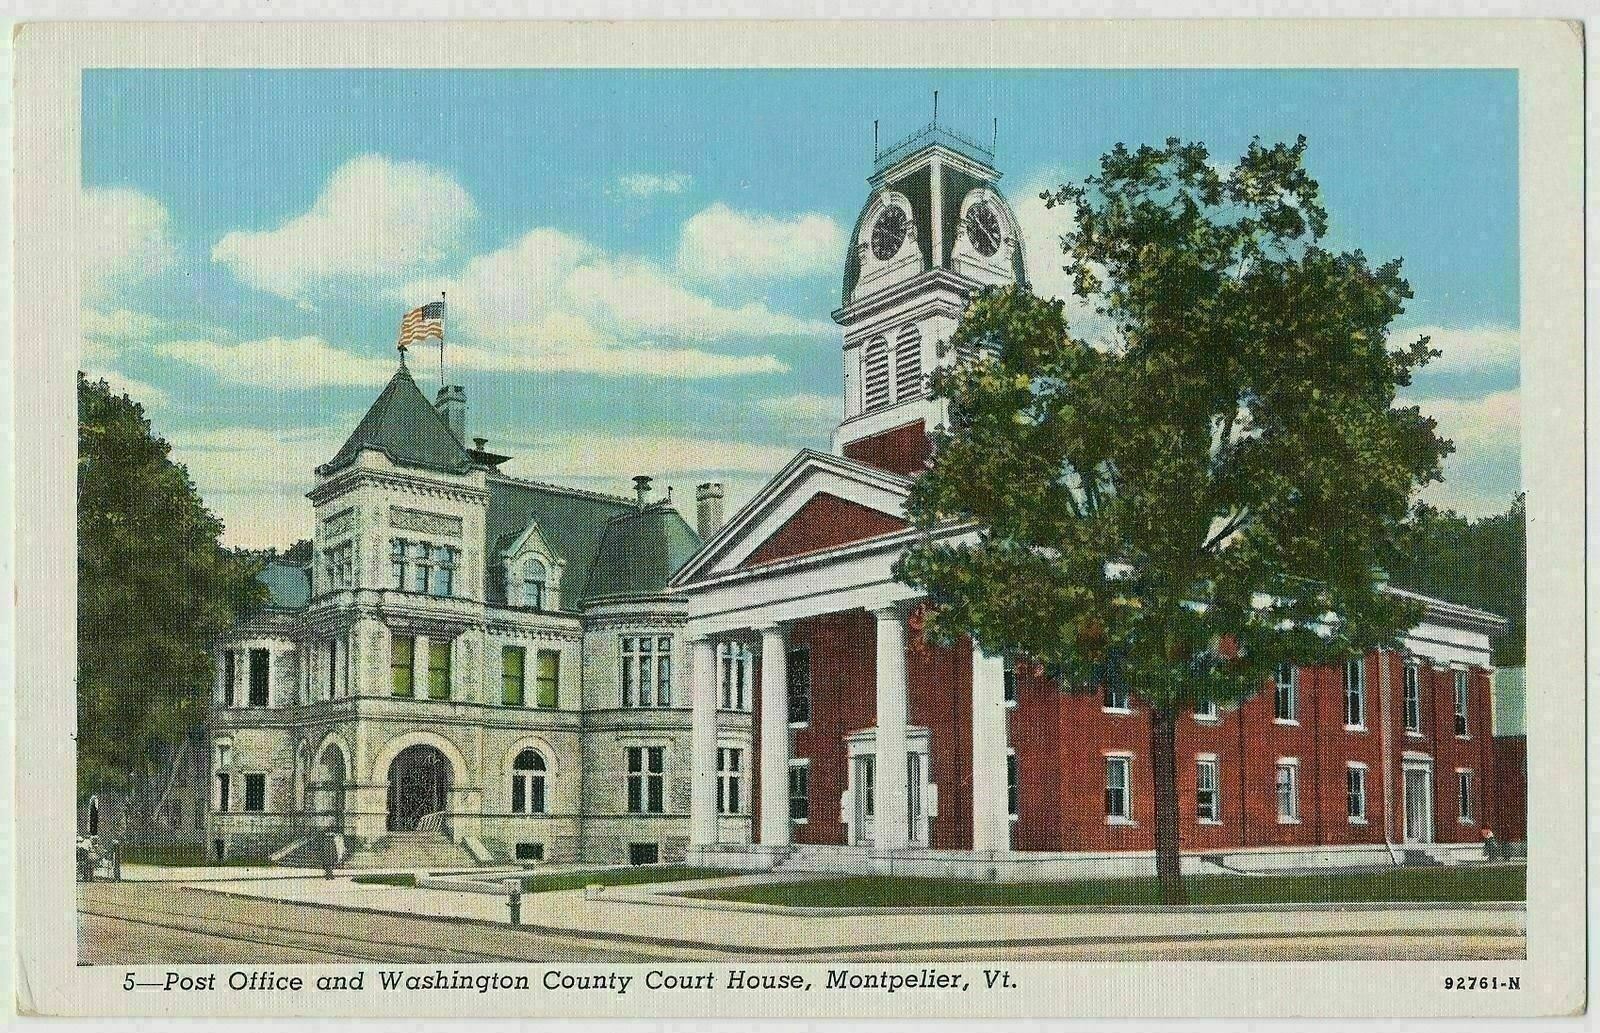 Washington County Court House and Post Office, Montpelier, Vermont